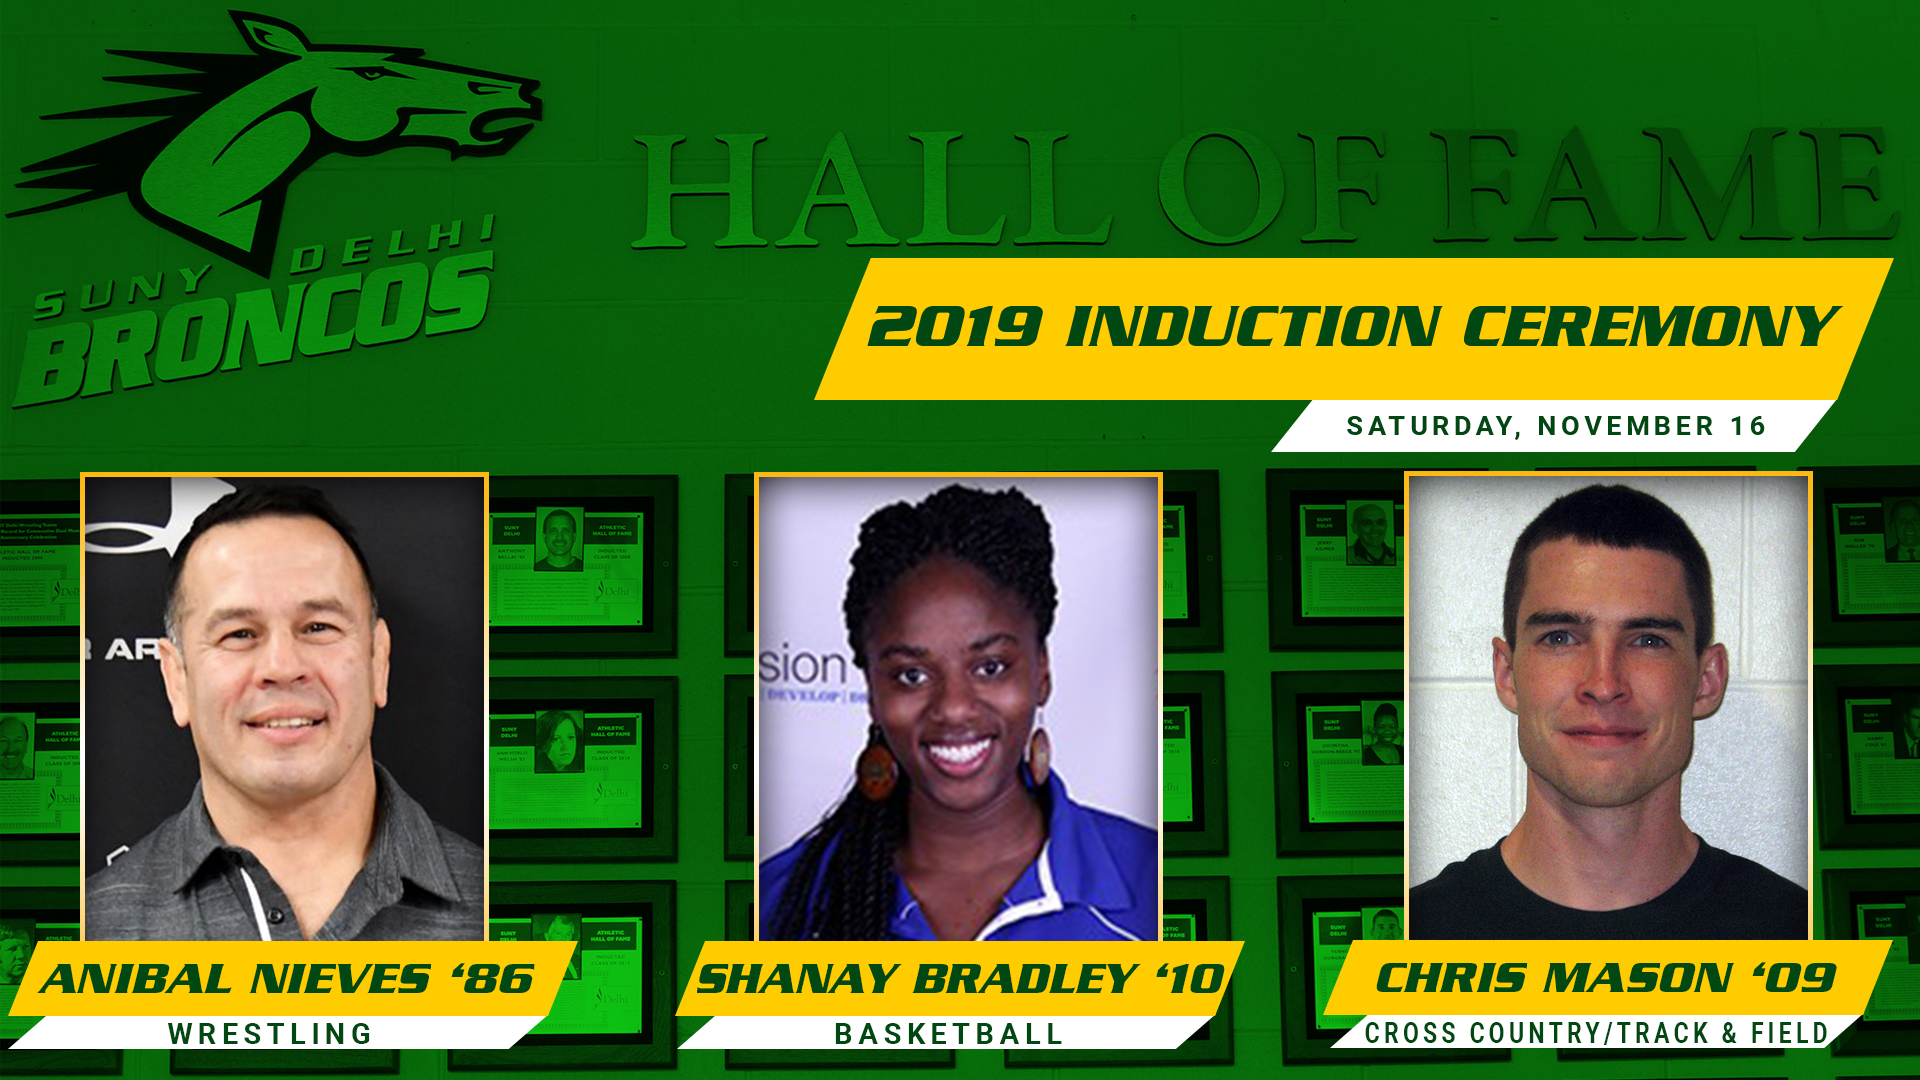 Athletics Hall of Fame Welcomes Three New Members this November